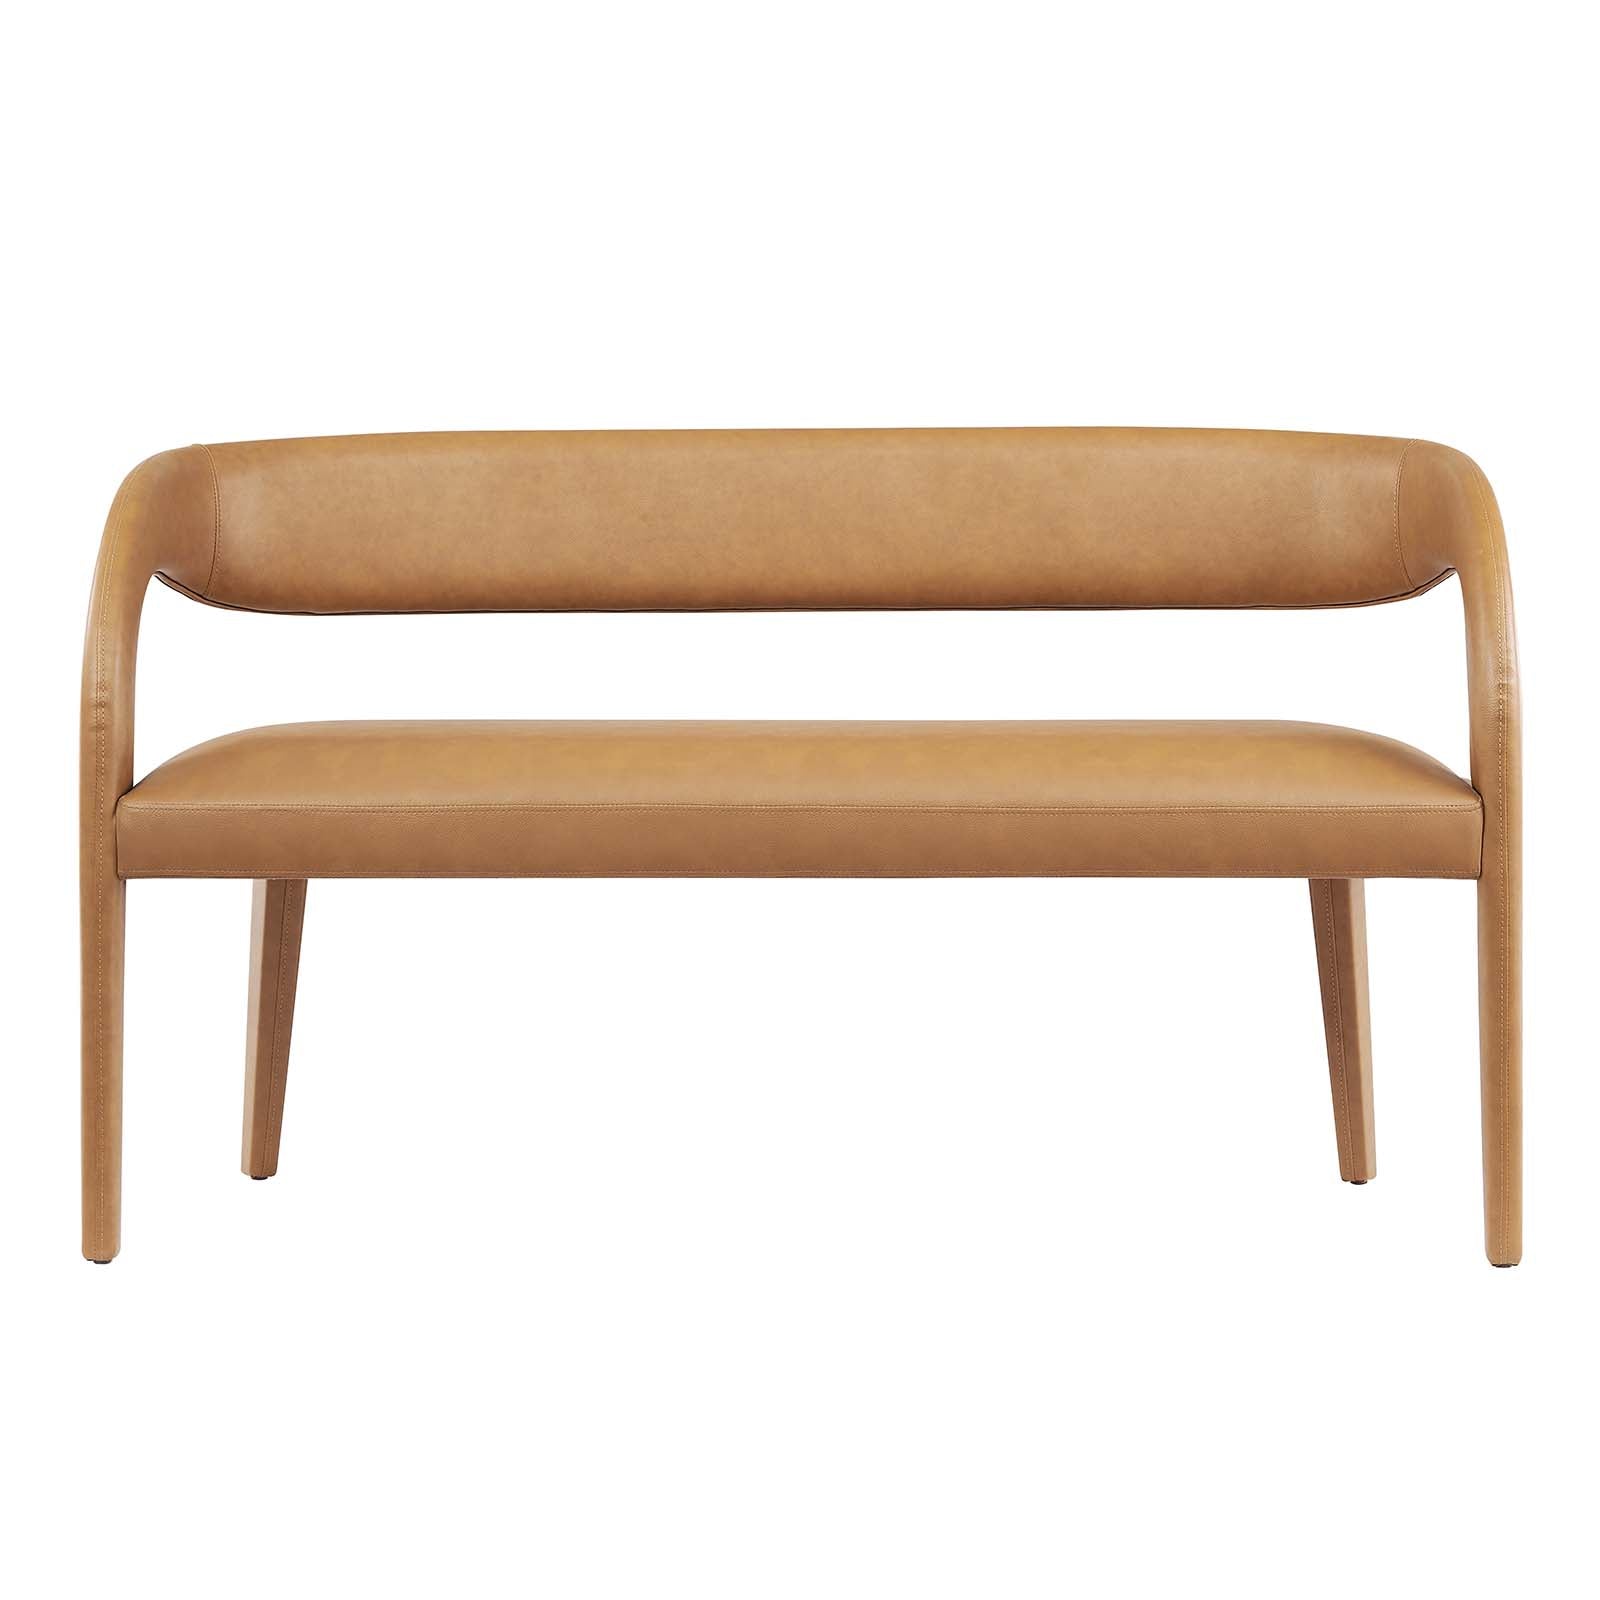 Pinnacle Vegan Leather Accent Bench By Modway - EEI-6570 | Benches | Modway - 12